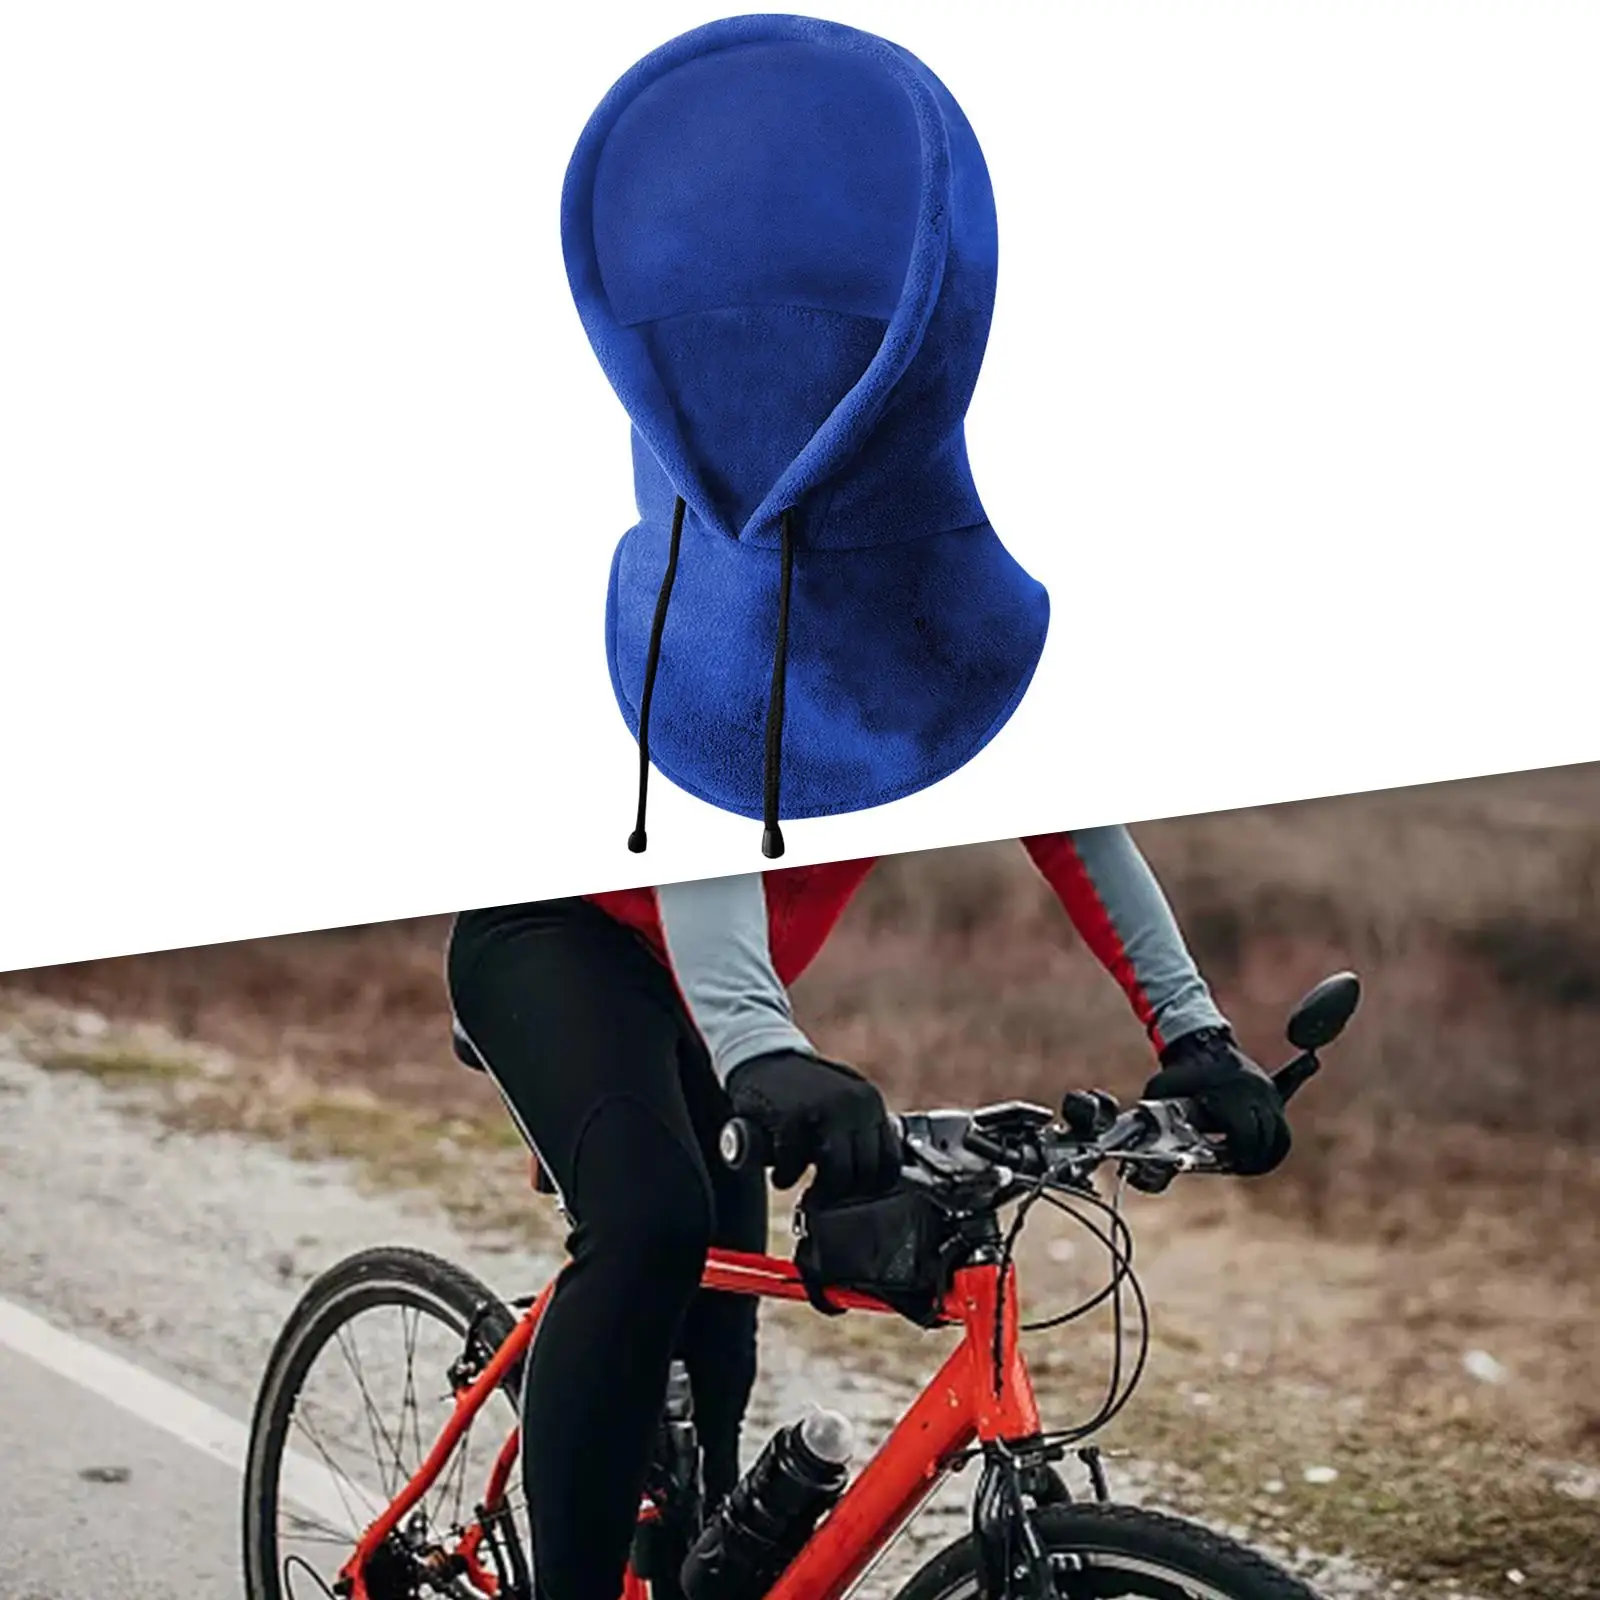 Winter Warm Riding Mask Windproof Full Face Headgear Outdoor Sports Mask Hooded Cycling Scarf Fleece Insulation Elastic Mask